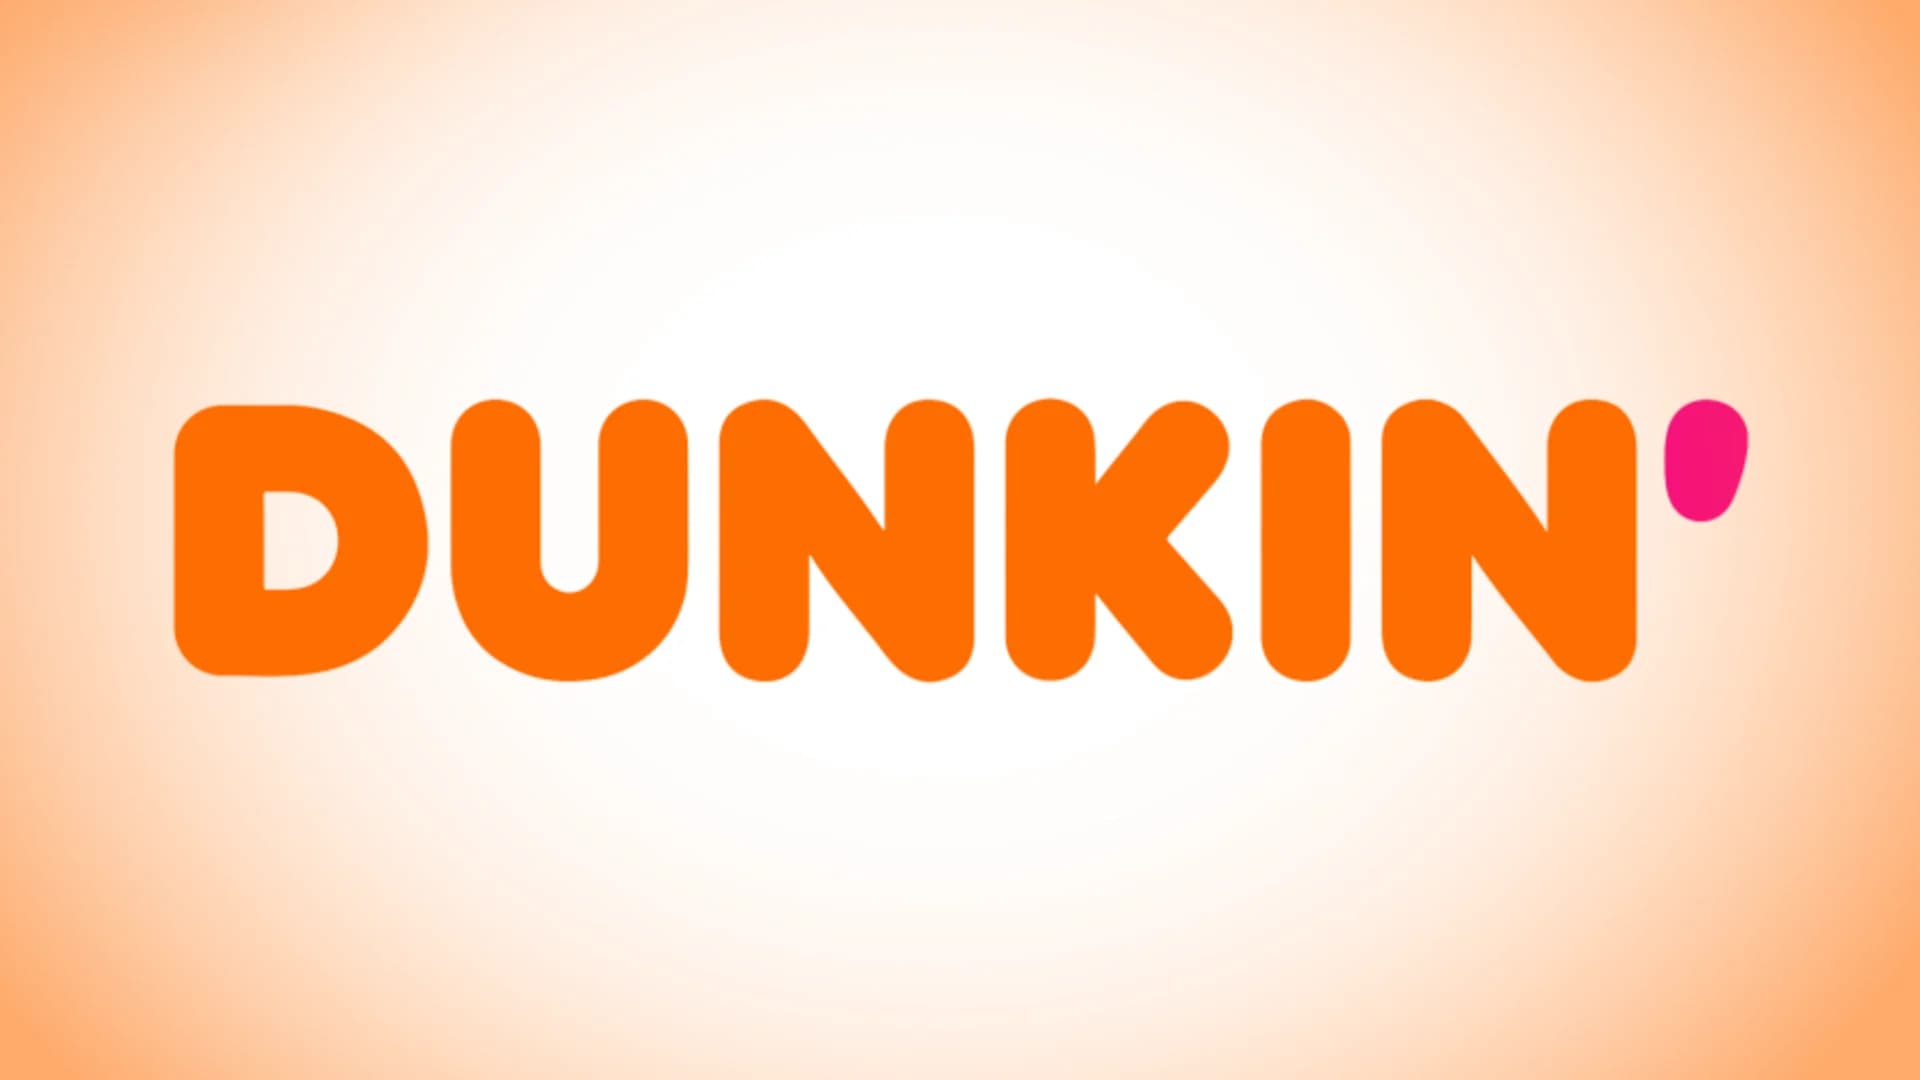 Need an afternoon jolt? Dunkin’ offering free small iced coffee today with any purchase